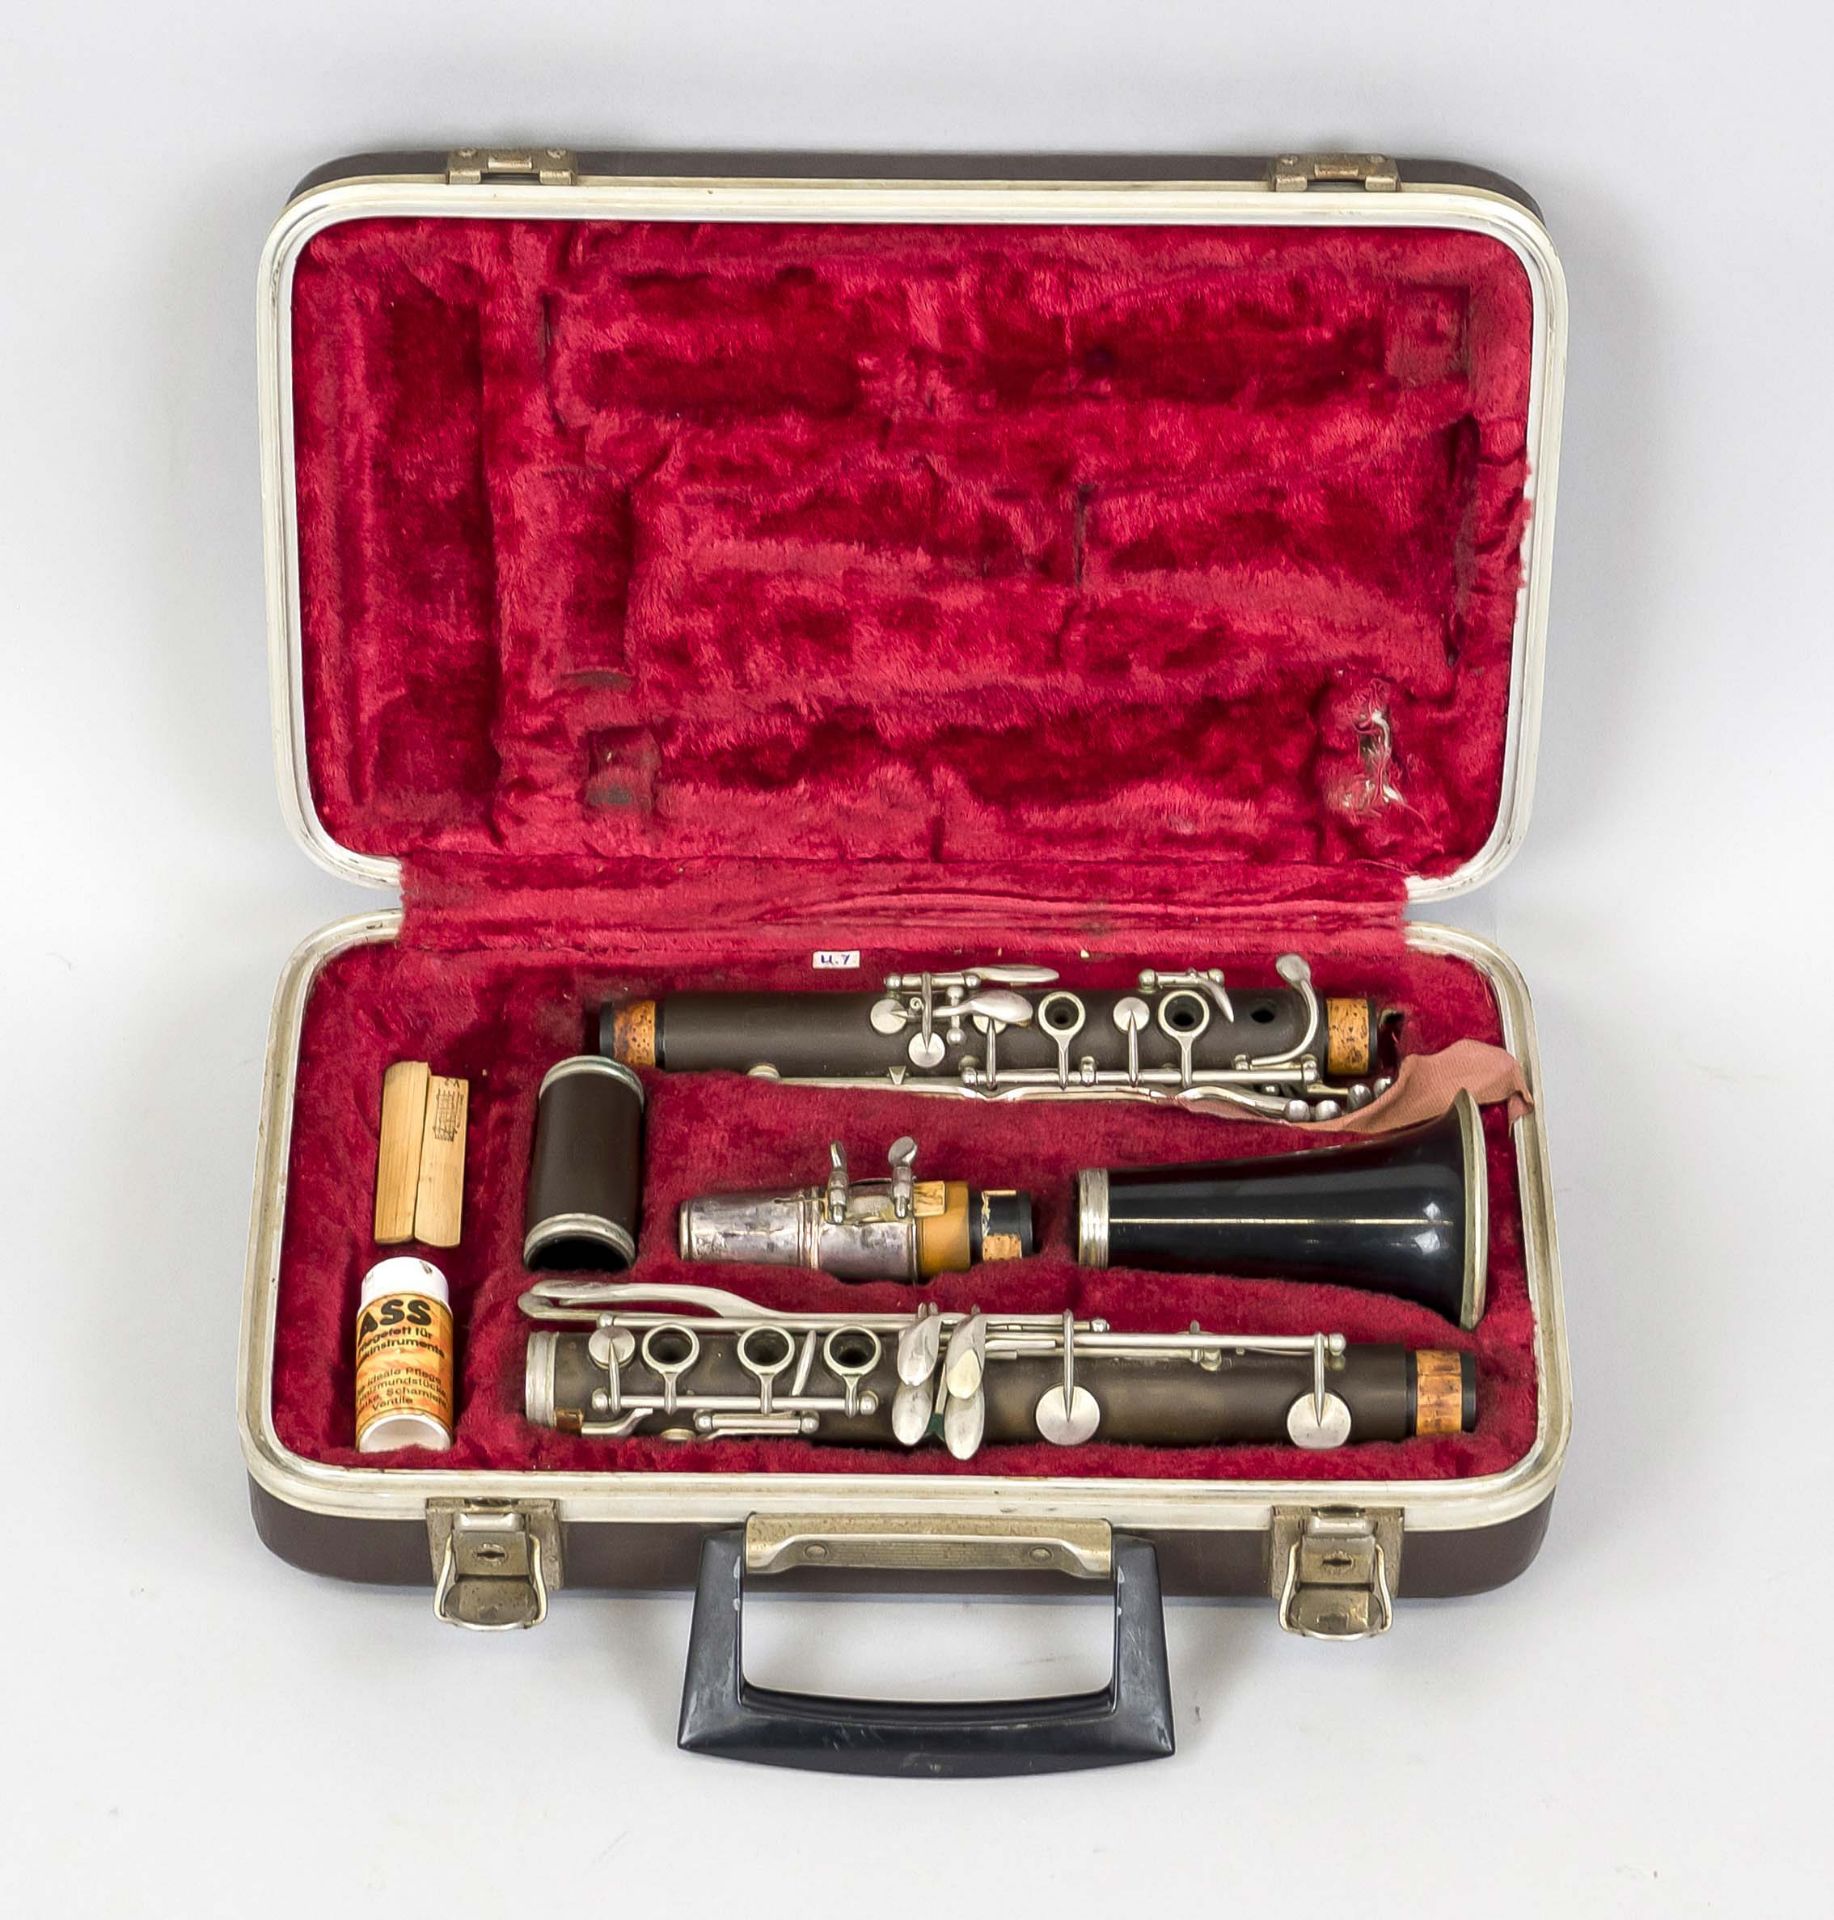 Clarinet, probably 1st half 20th century, strong signs of use, with case, case dimensions 36 x 22